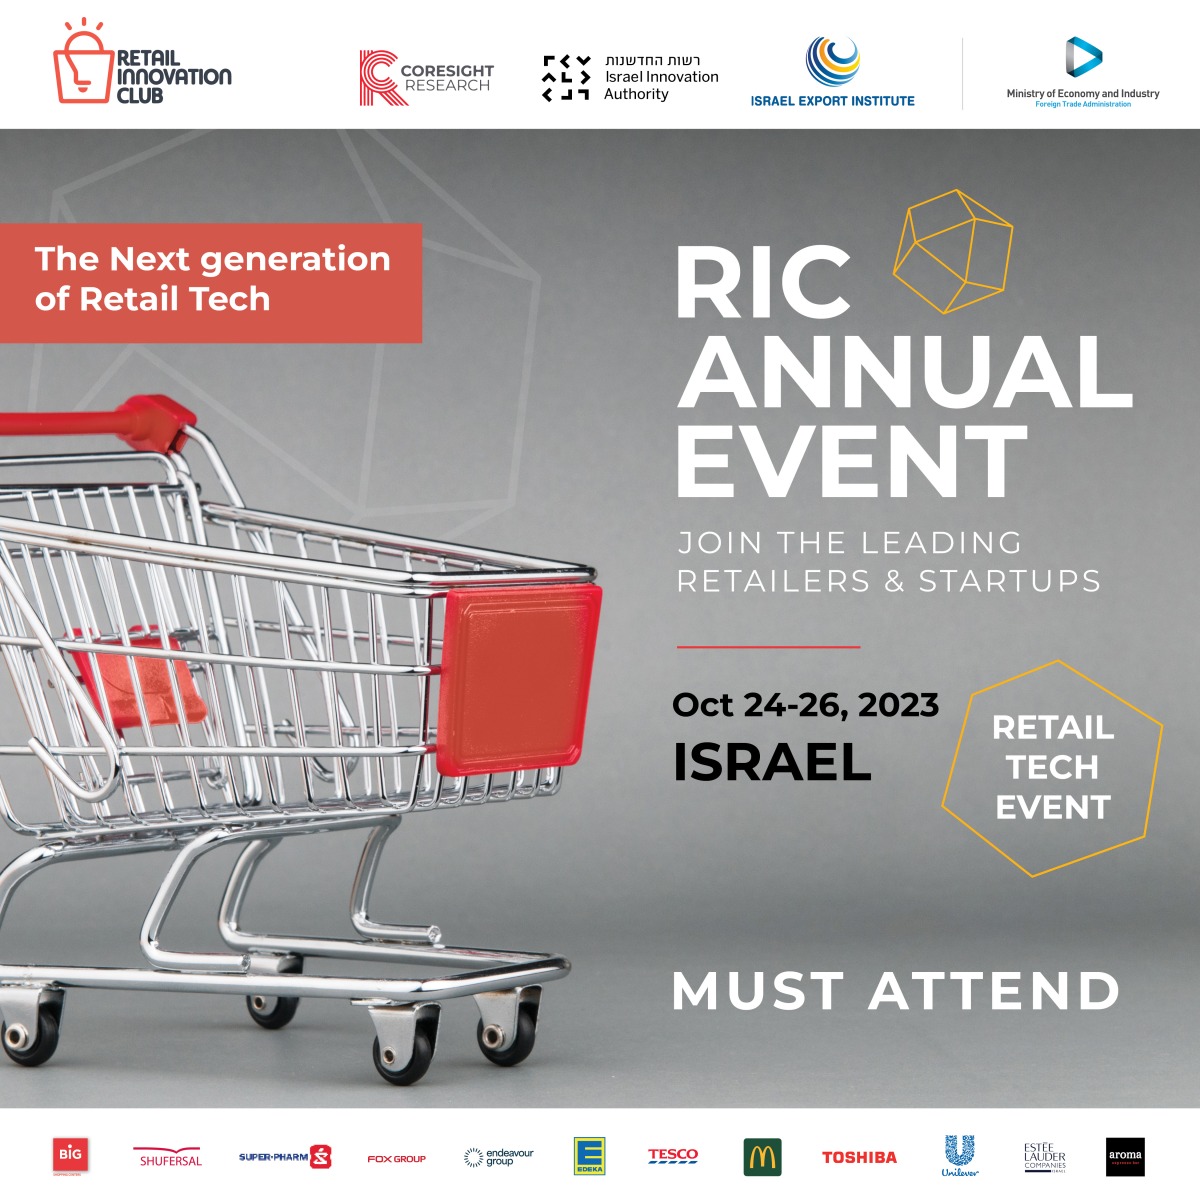 Online: The Retail Innovation Club Annual Event 2023